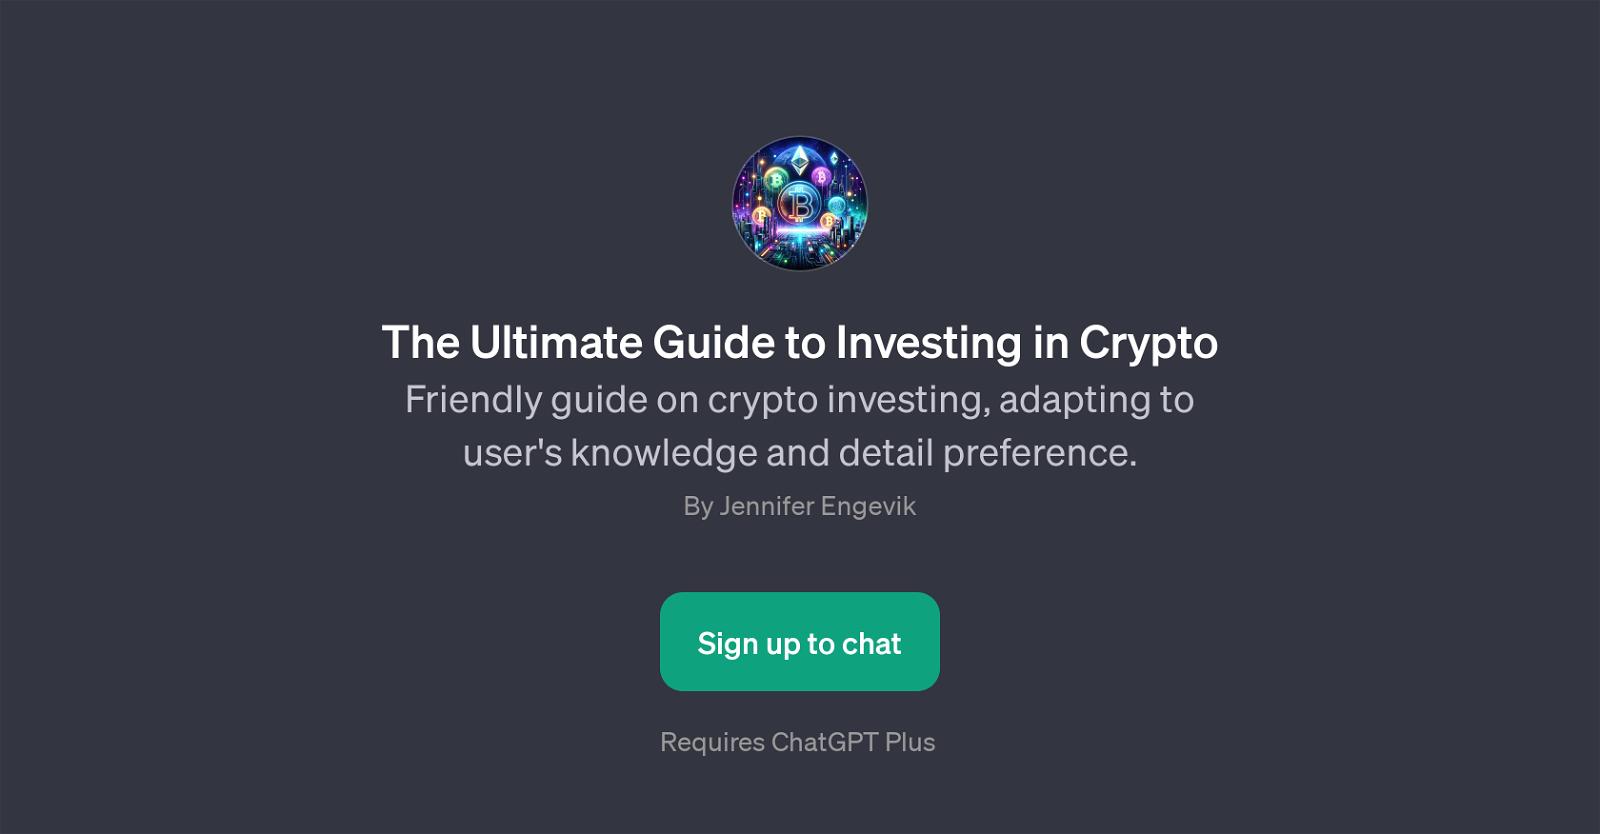 The Ultimate Guide to Investing in Crypto GPT website